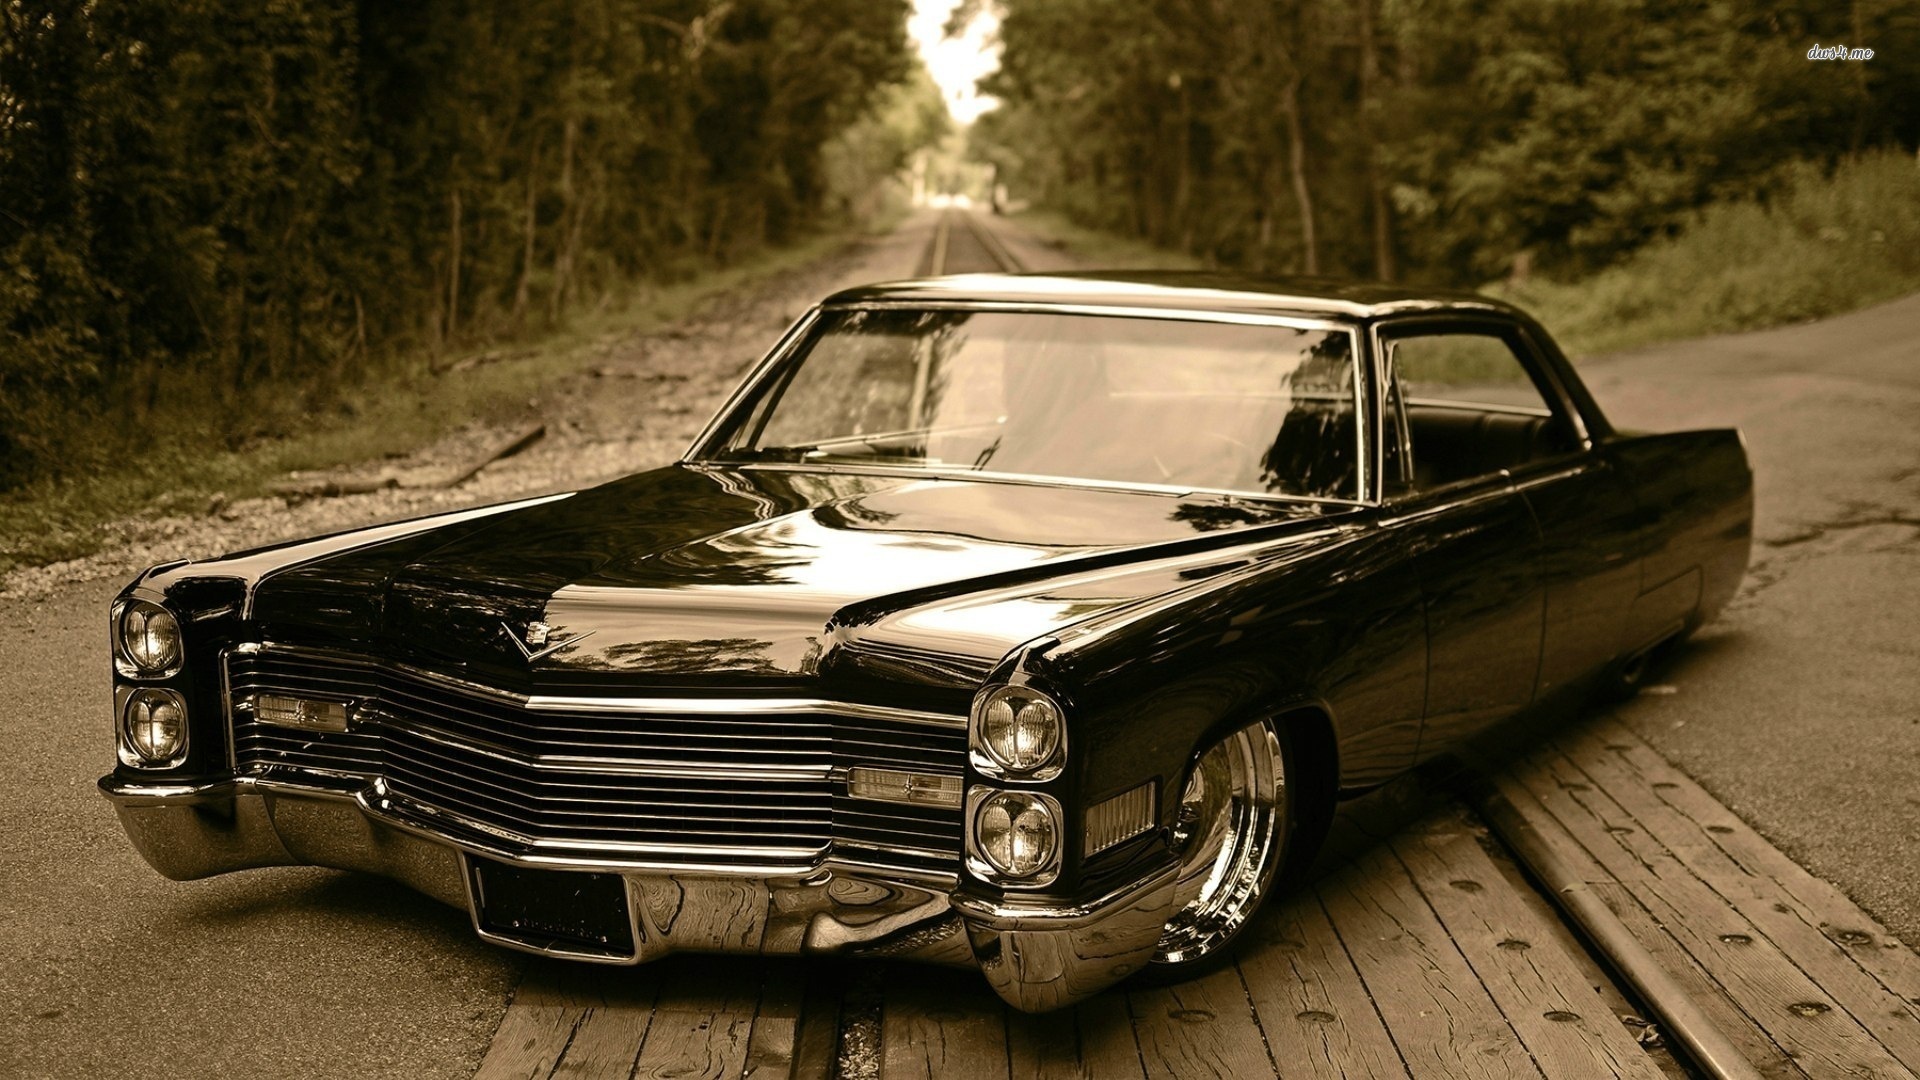 Lowrider wallpaper pictures